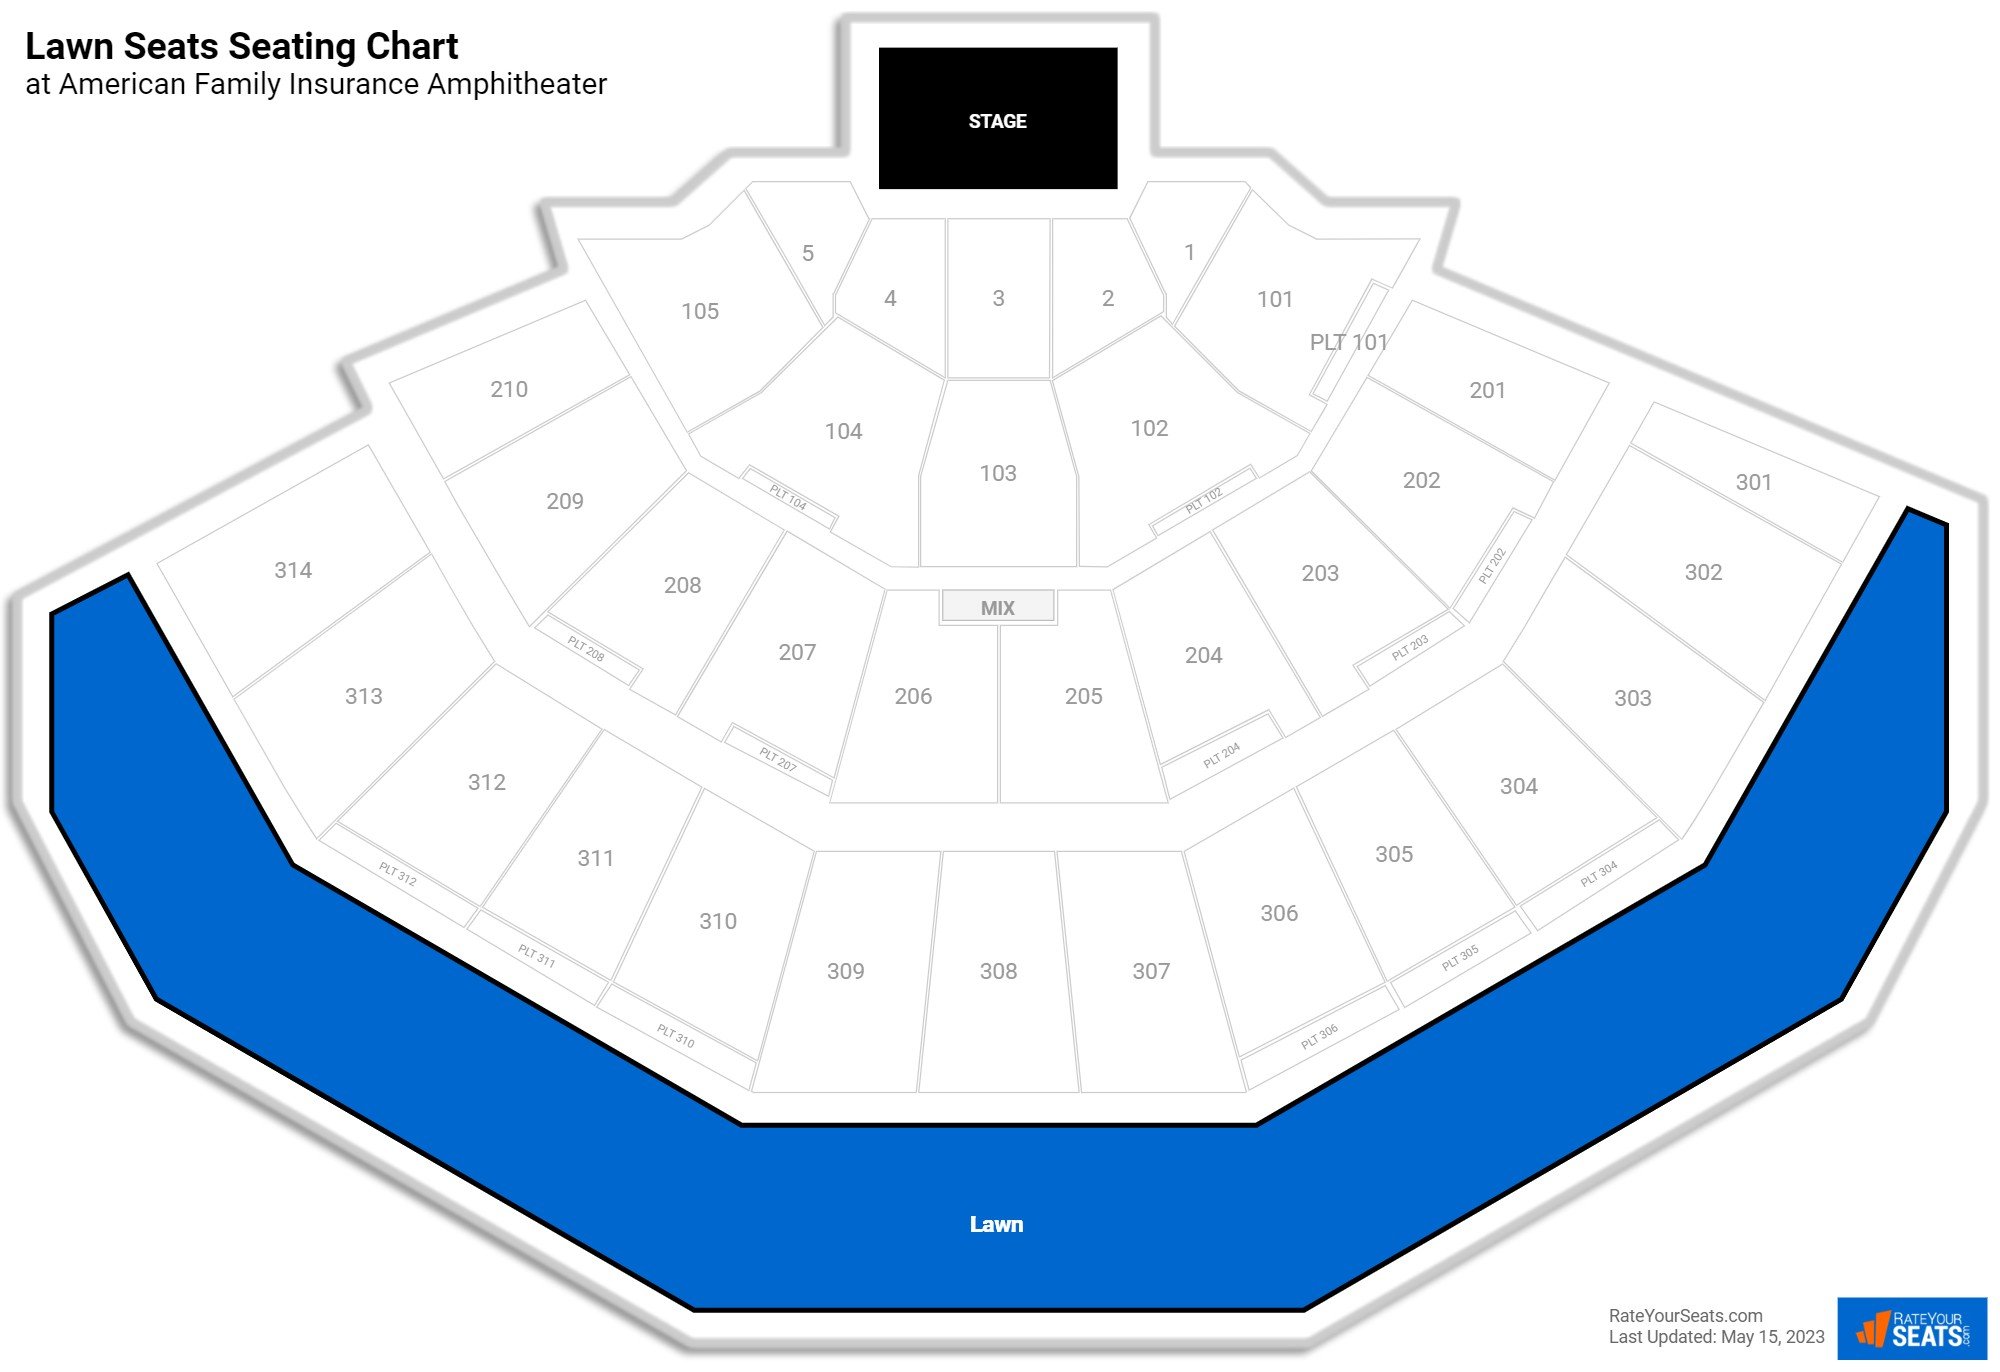 Concert Lawn Seats Seating Chart at American Family Insurance Amphitheater